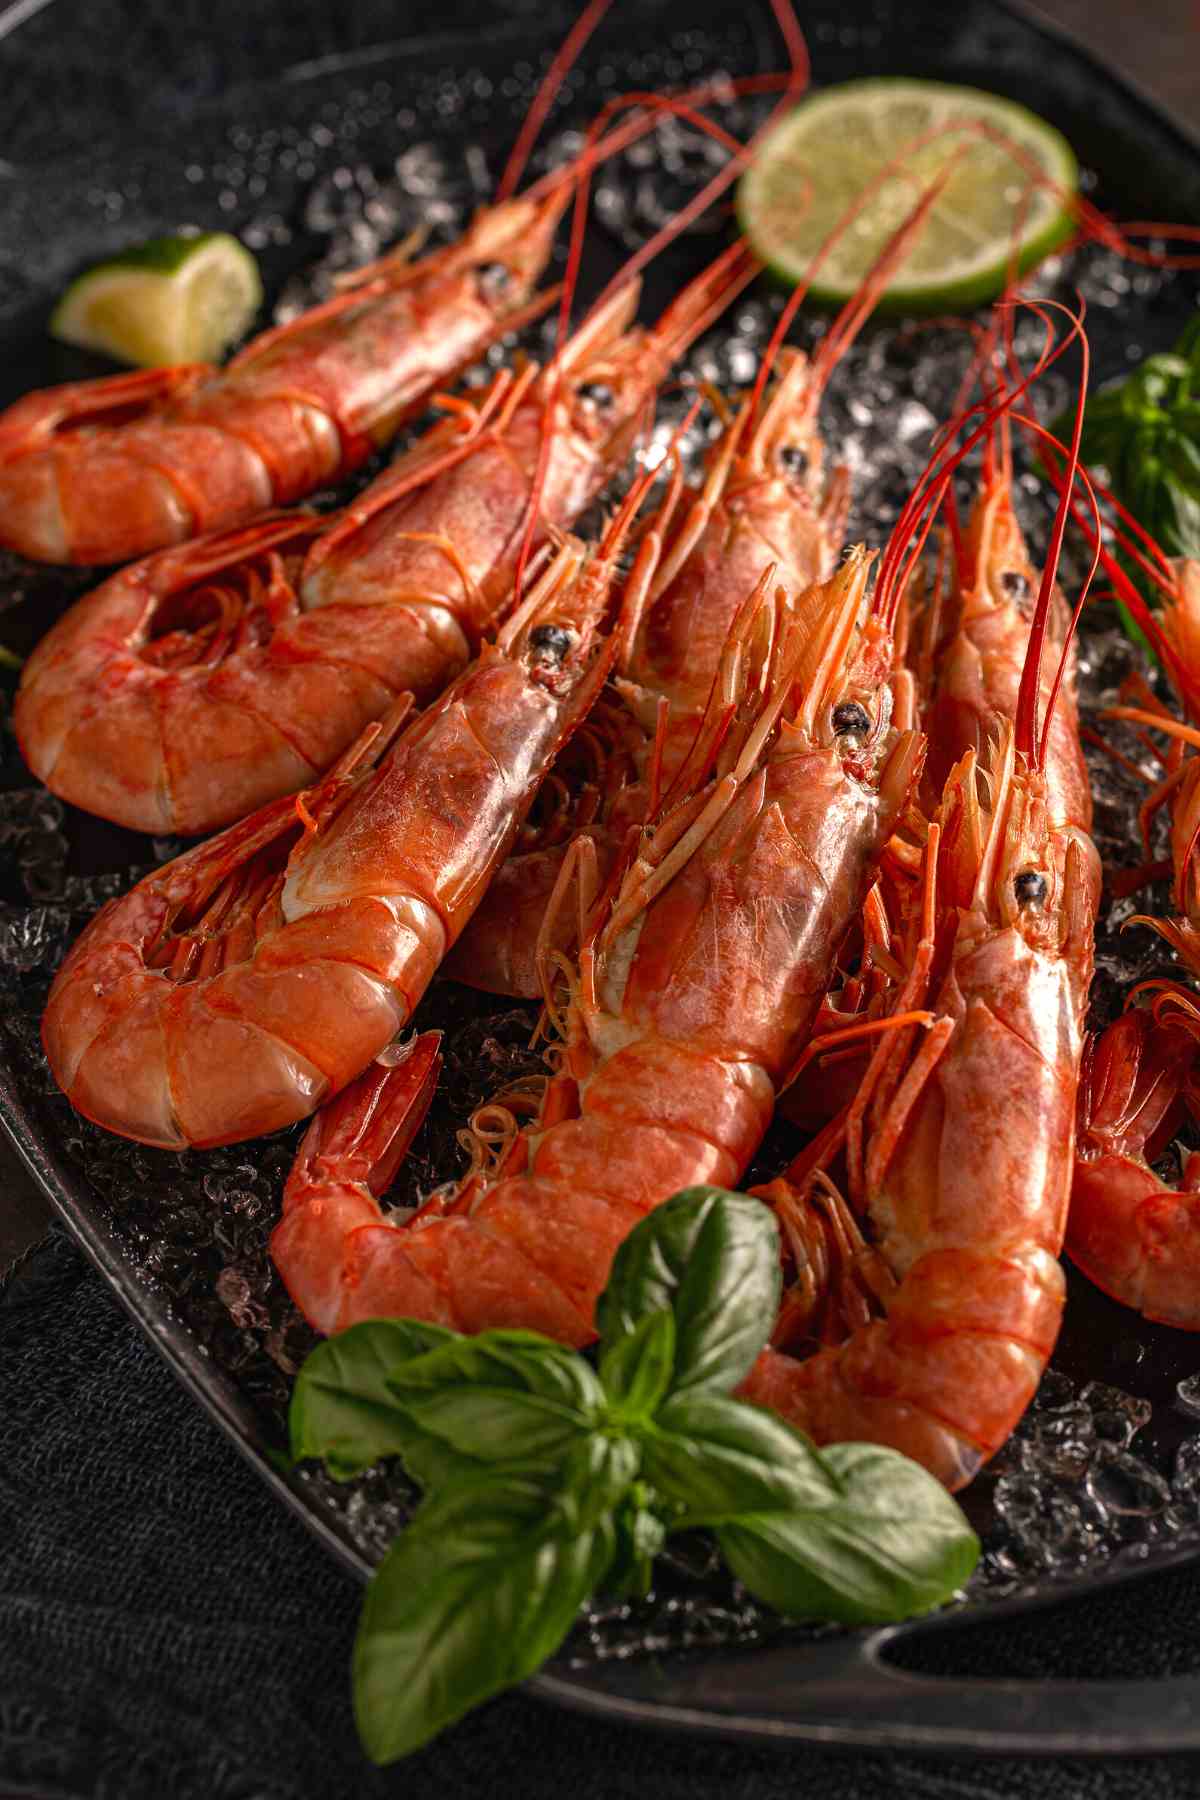 Red Argentinian Shrimp are considered by many to be a delicacy. Also known as Wild Patagonian Shrimp, they’re found off the coast of Argentina and are known for their bright red color, delicate taste, and buttery texture.